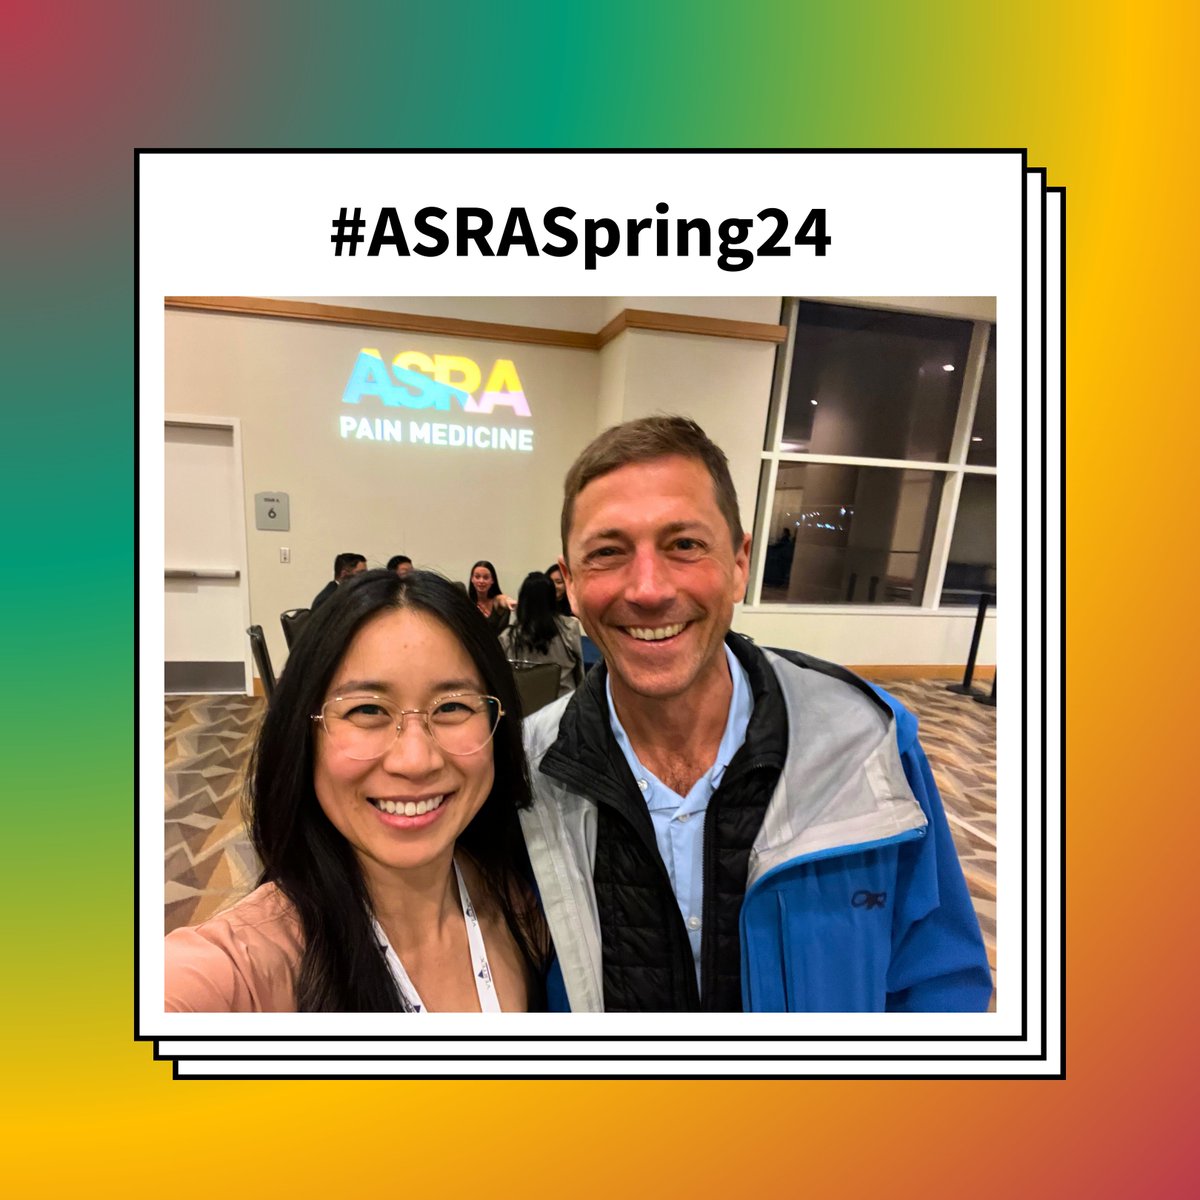 Our fellows @SiyunXieMD & @AnthonyMachi had a memorable, productive weekend at #ASRASpring24 in San Diego! Xie was recognized for chairing @ASRA_Society's Resident & Fellow Committee & presented a case series related to long COVID. Machi taught workshops, led the official…